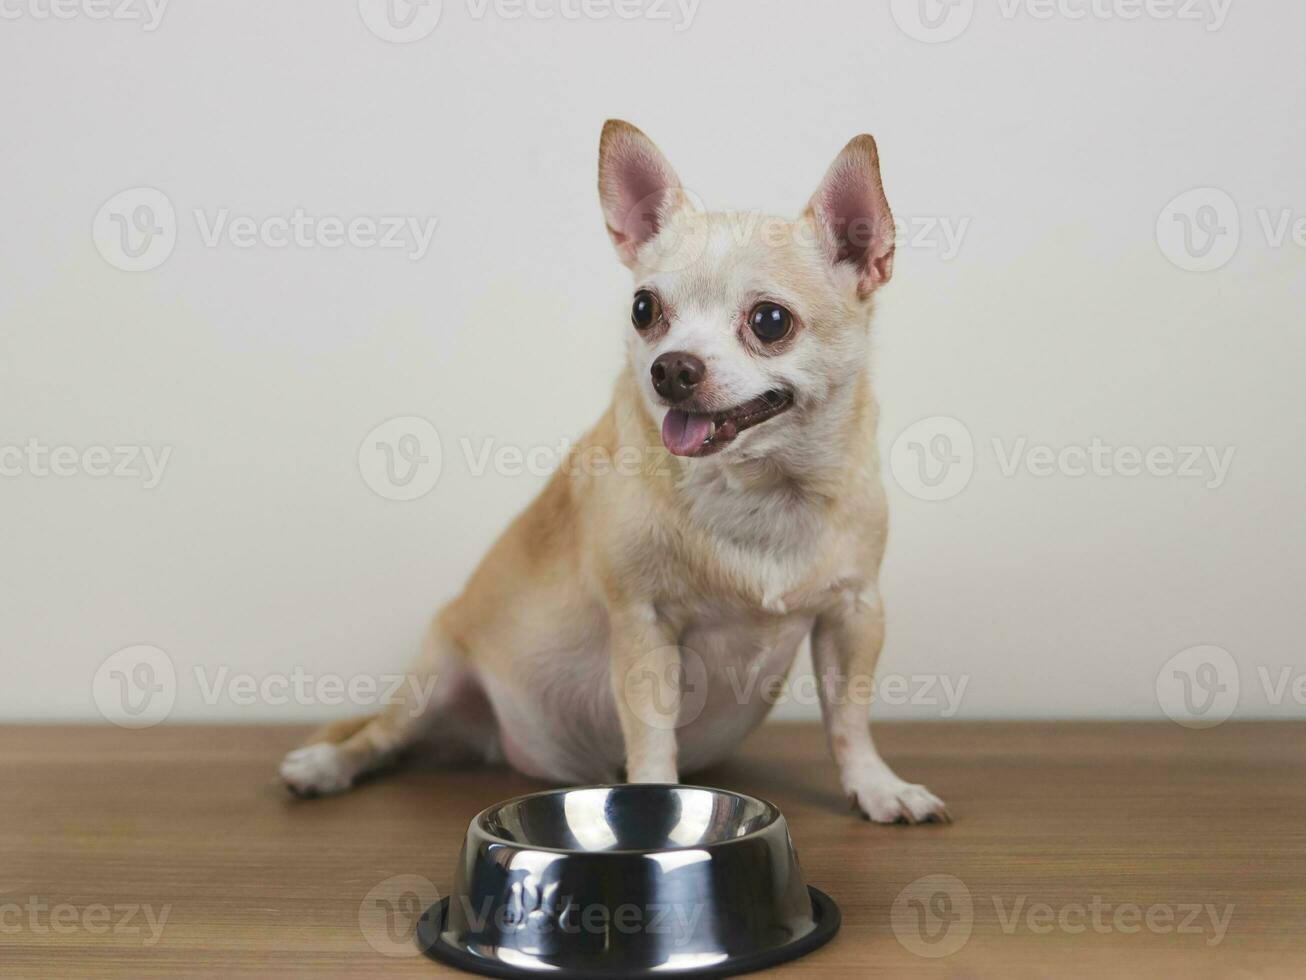 Hungry chihuahua dog sitting on wooden floor  with empty dog food bowl, looking to his owner asking for food. photo